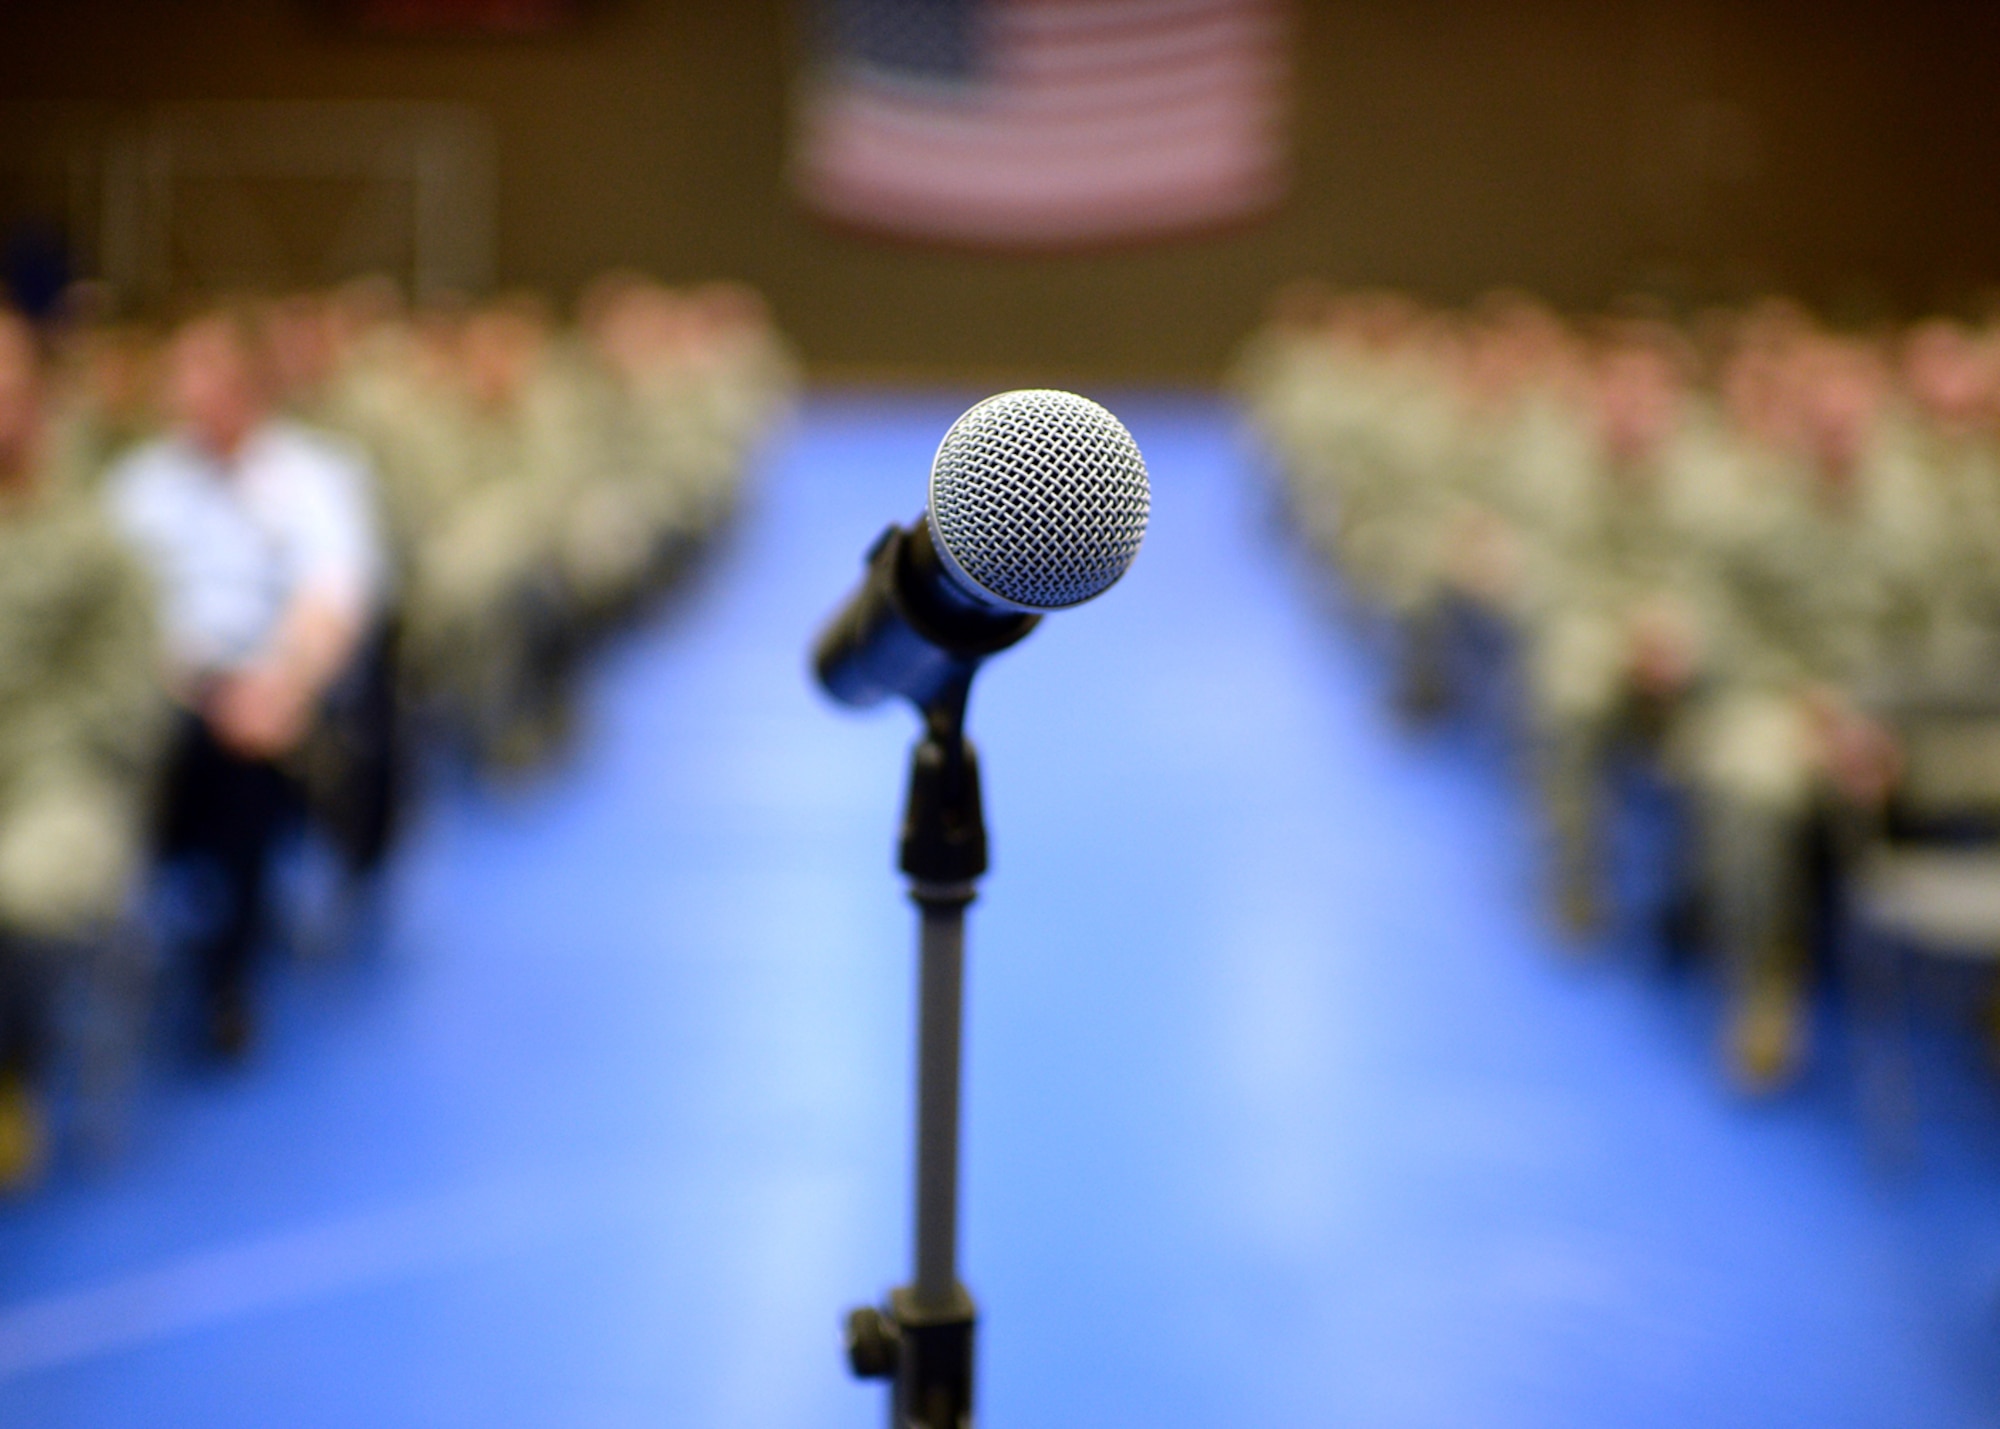 A microphone rests in front of more than 300 U.S. Air Force Airmen in the Skelton Memorial Fitness Center at Spangdahlem Air Base, Germany, March 24, 2014. The leadership of the 52nd Fighter Wing addresses Airmen during mass briefings, or commander’s calls, throughout the year, and this one targeted the wing's enlisted corps. (U.S. Air Force photo by Staff Sgt. Daryl Knee/Released)